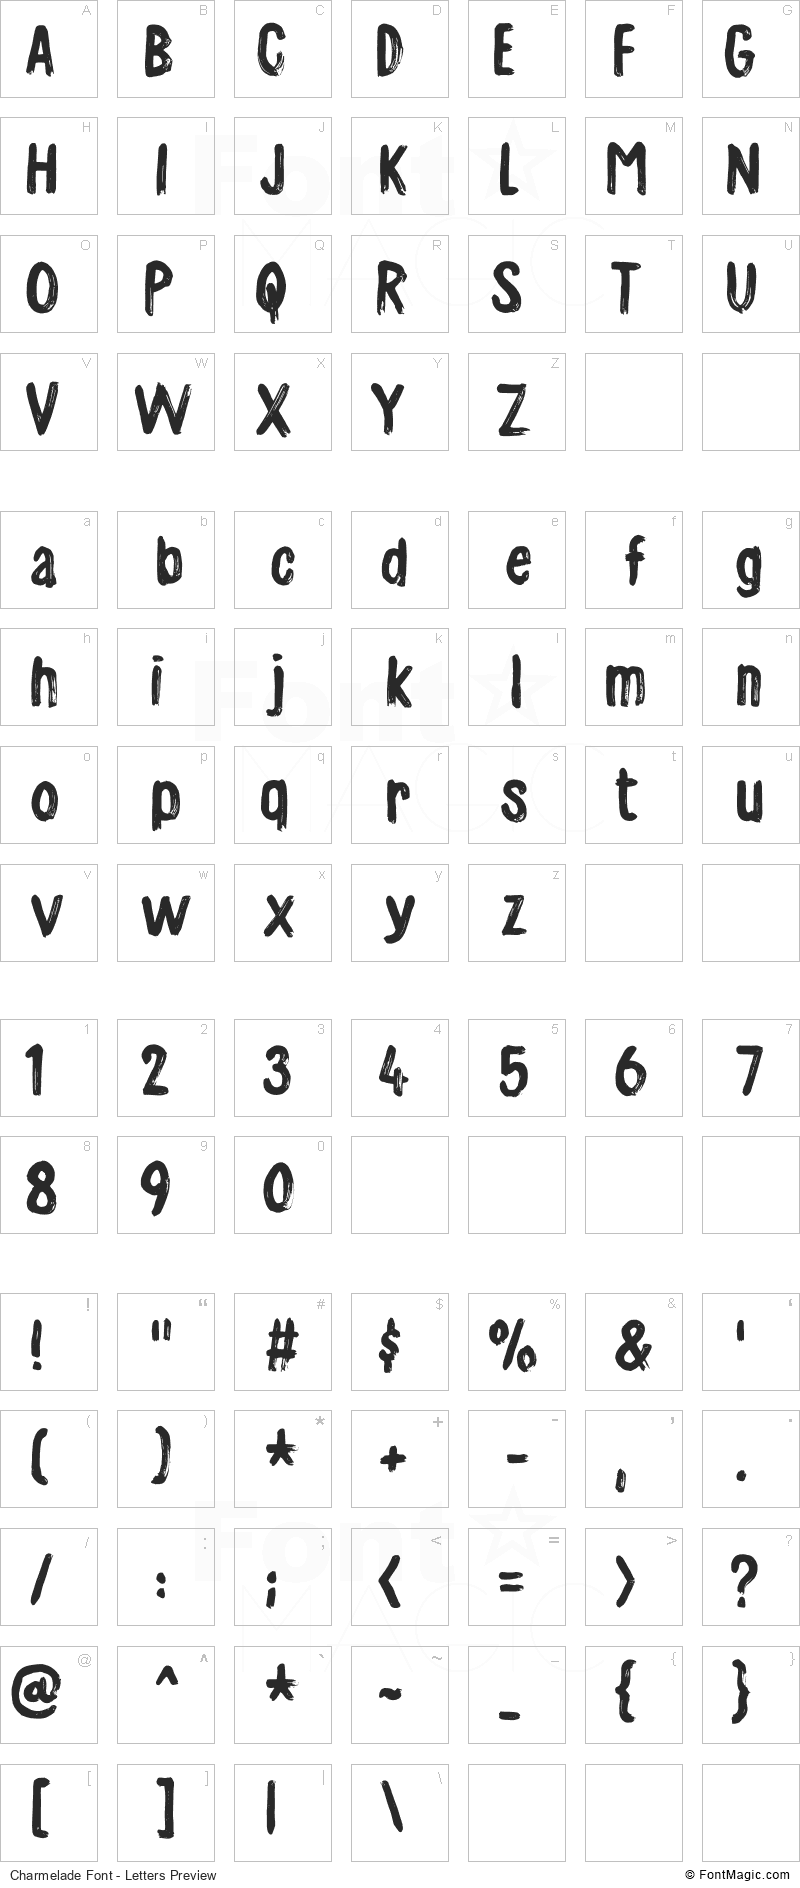 Charmelade Font - All Latters Preview Chart